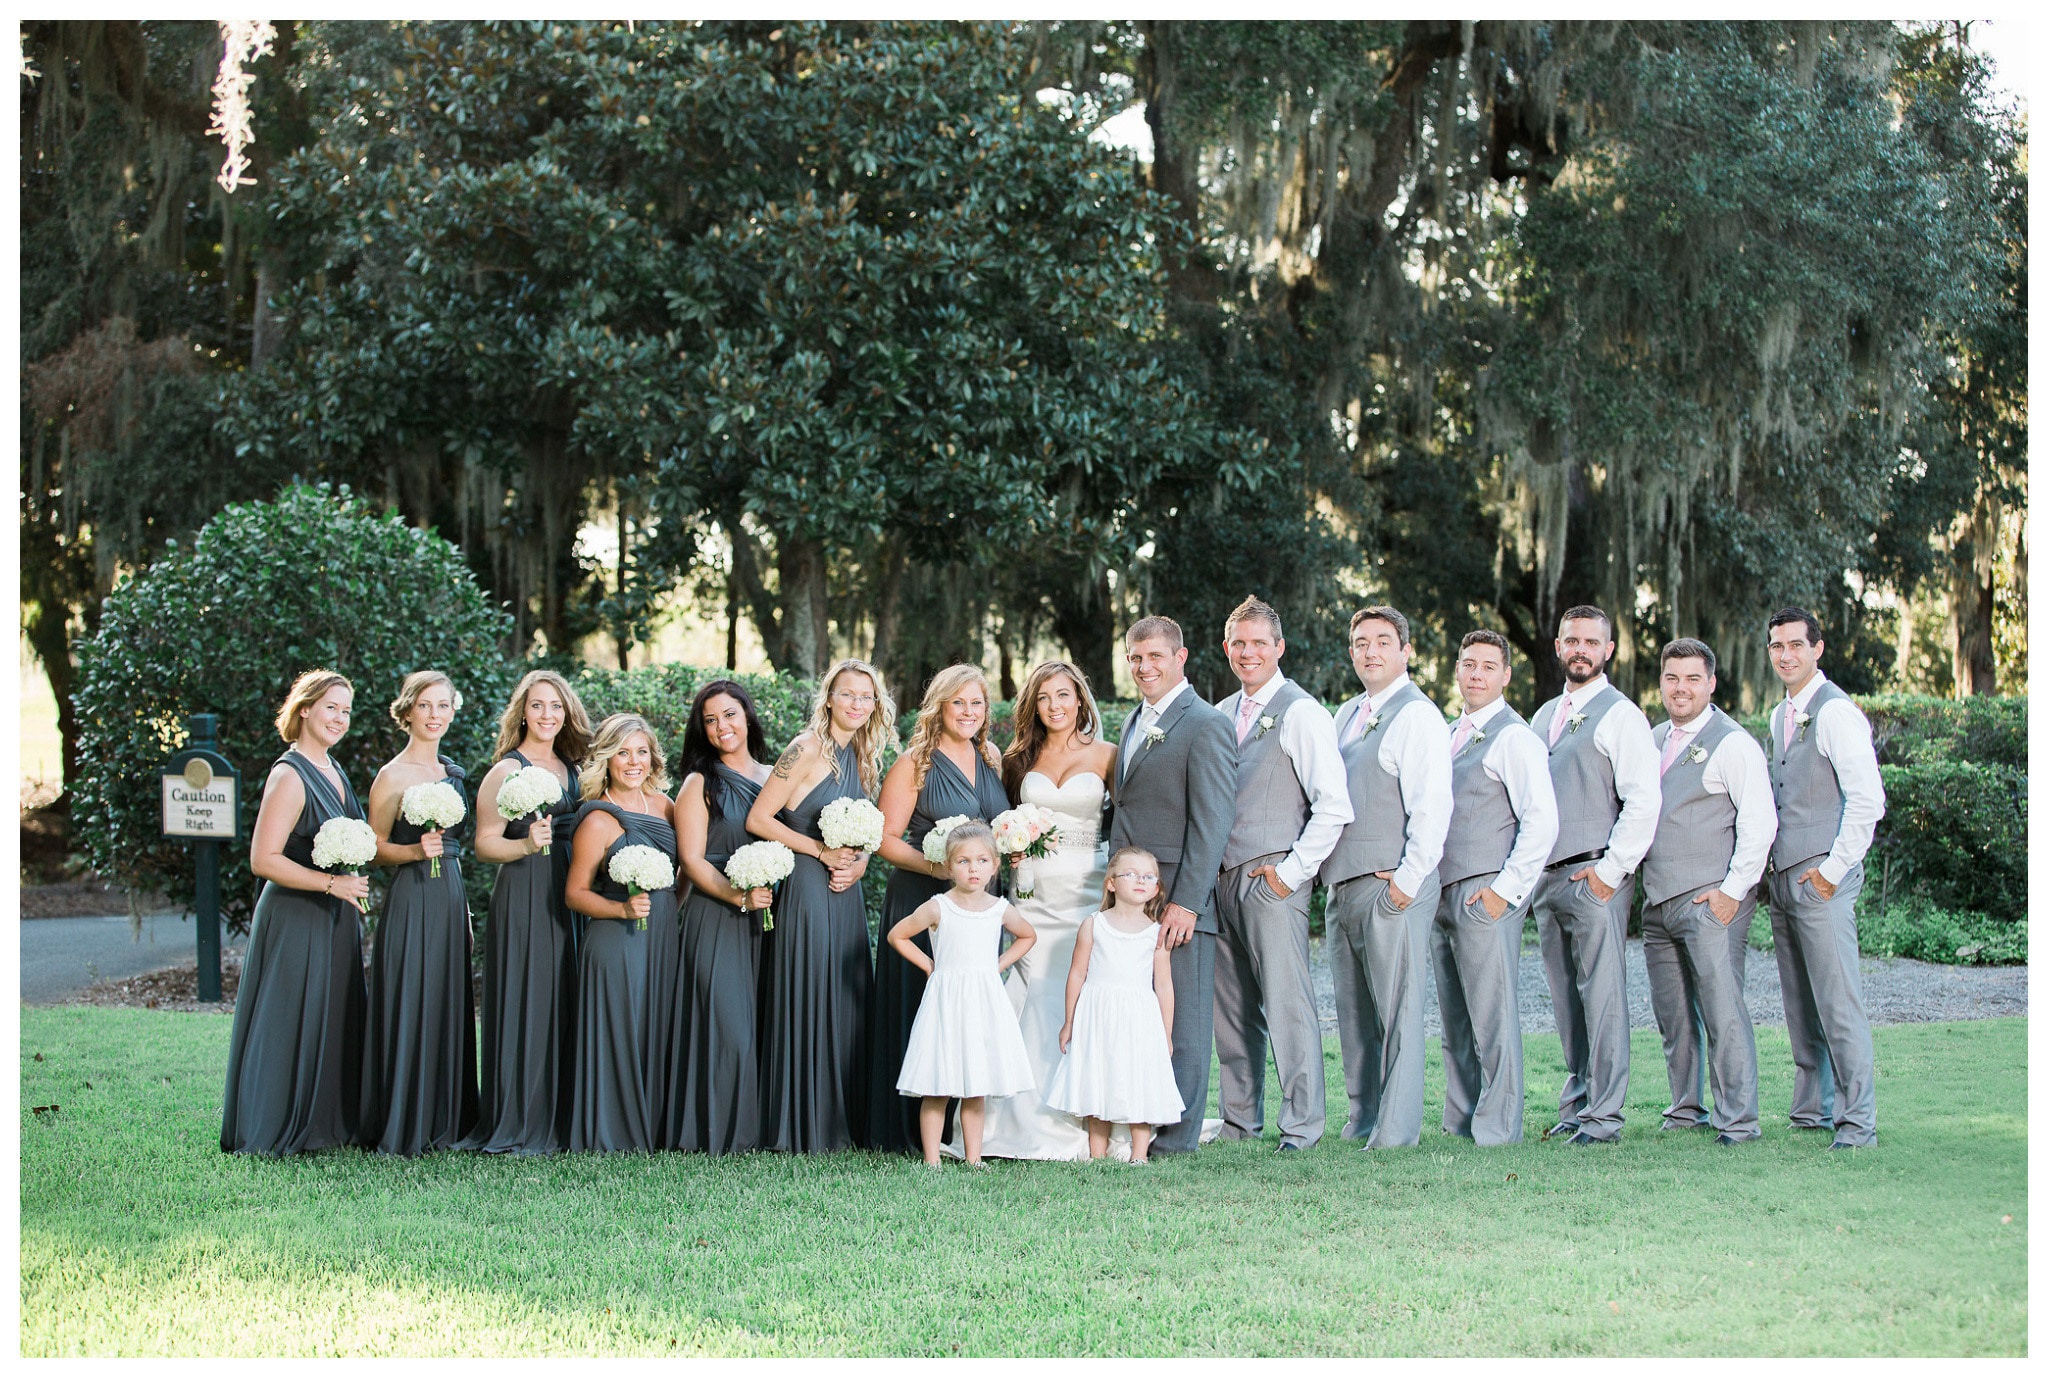 The Full Wedding Party - Kay and Josh's wedding at the Heritage Plantation, Pawleys Island, South Carolina on September 19, 2015 Heritage Plantation Southern wedding, Pawleys Island, South Carolina Venue and Catering: Heritage Club, Pawleys Island Music: Paul Matthews Entertainment Brides dress: The Little White Dress Cake: Buttercream Cakes and Catering Event Rentals: Eventworks Photographer: One Life Photography